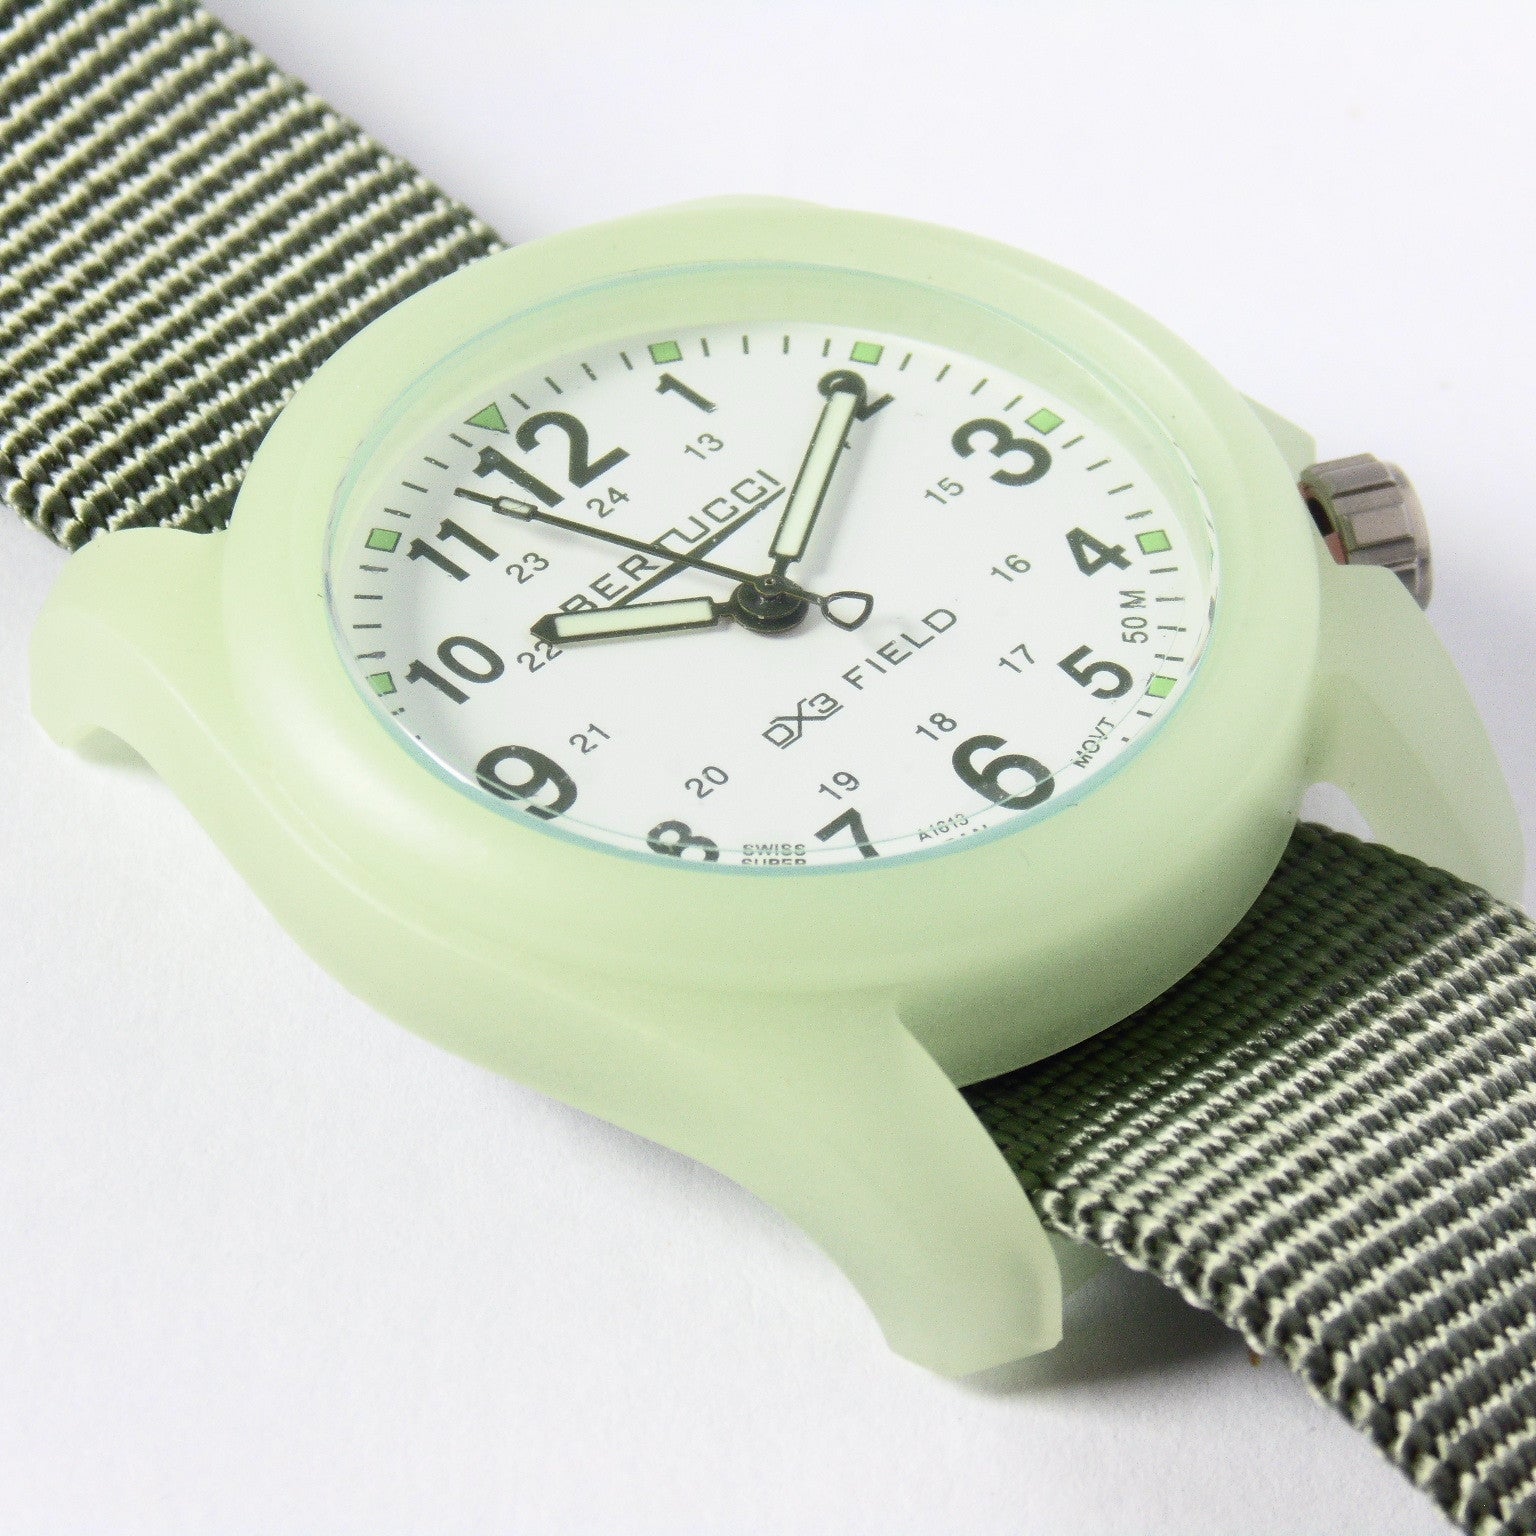 Bertucci DX3 Luminous Resin Watch, Olive Green Nylon Strap, White Dial - 11028 - Watchfinder General - UK suppliers of Russian Vostok Parnis Watches MWC G10
 - 1